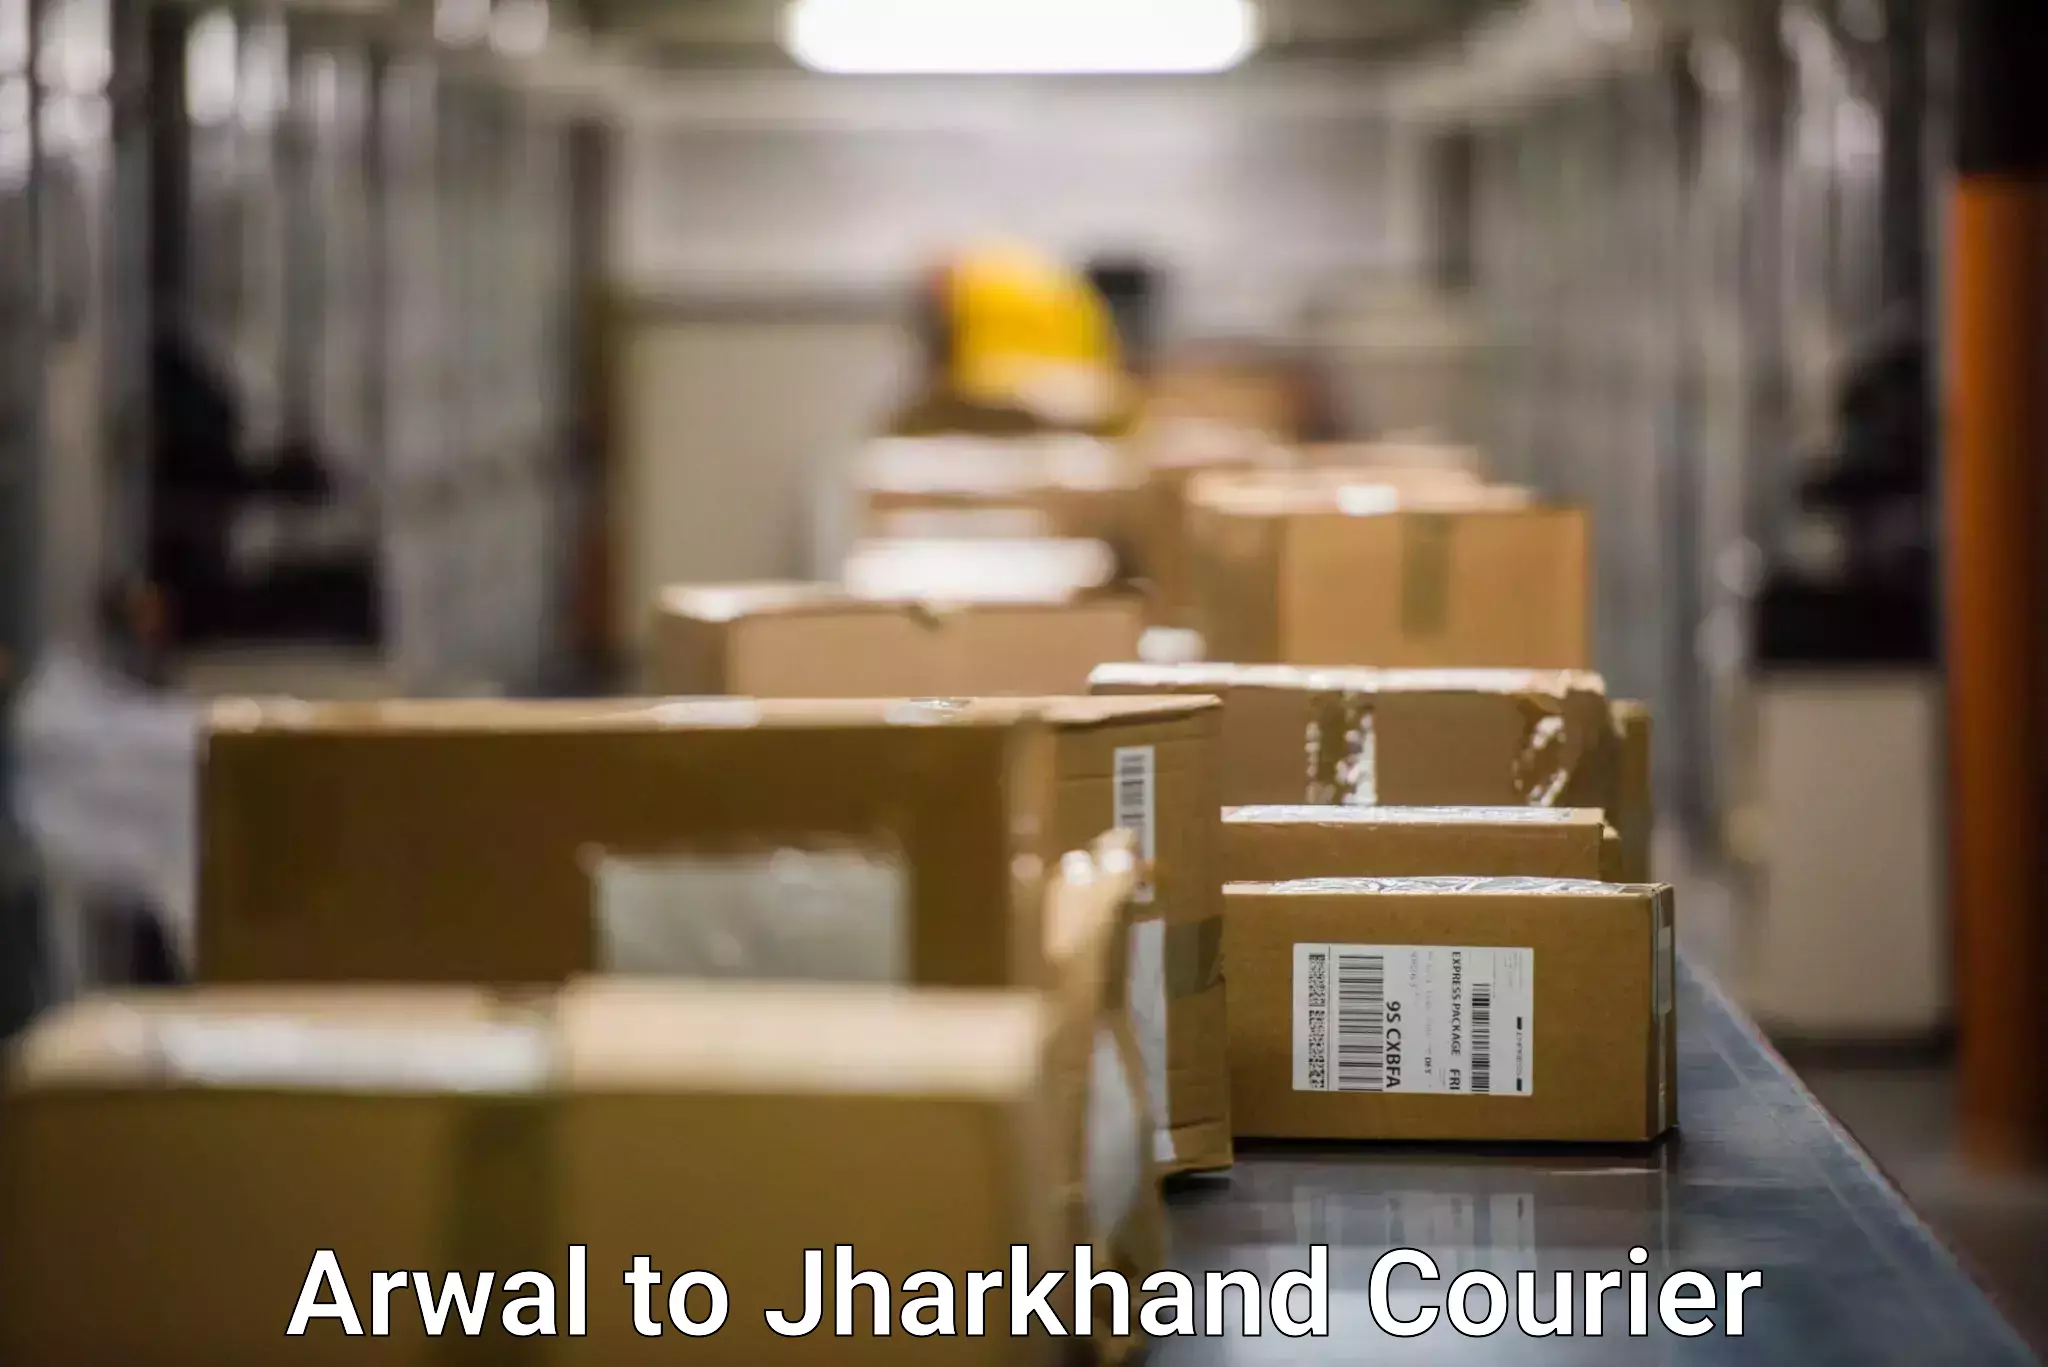 Full-service courier options Arwal to Jharkhand